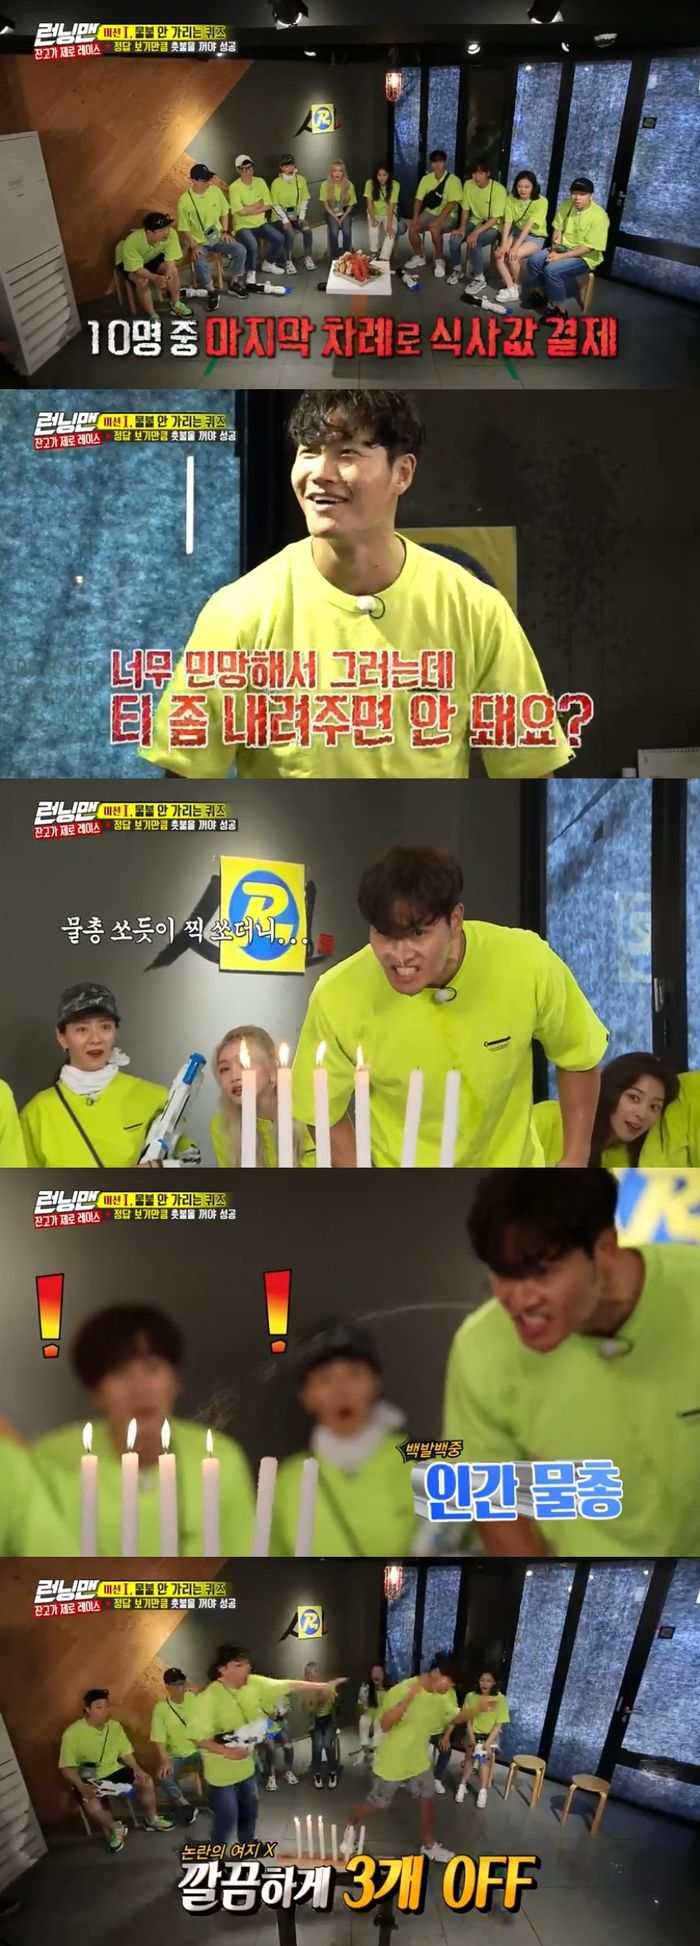 Kim Jong-kook turned into a human water gun?On SBS Running Man broadcasted on the 23rd, Running Man members were shown quizzing to eat a resting meal.On the day, Running Man members started a zero-lace balance with a recreational ceremony. Those who arrived at the restaurant became teams of two and started quizzing.However, the members were able to take the water from the water gun with their mouths and turn off the candles to meet the quiz.First, the Yang Se-chan - Kim Jong-kook team was the Top Model, and Yang Se-chan, who was holding a water gun, accidentally shot Kim Jong-kooks pants.In a visual (?), which can cause some misunderstanding, Lee Kwang-soo asked, Its so embarrassing, but please drop the tee down.Song Ji-hyo also advised, Just wet your pants. Kim Jong-kook was embarrassed and laughed, saying, Ill take care of it.Kim Jong-kook then took water from his mouth and then turned the candle out, the Top Model, which was astonished by the water spraying through his teeth as a water gun.The members who saw this appearance admired it as a human water gun.